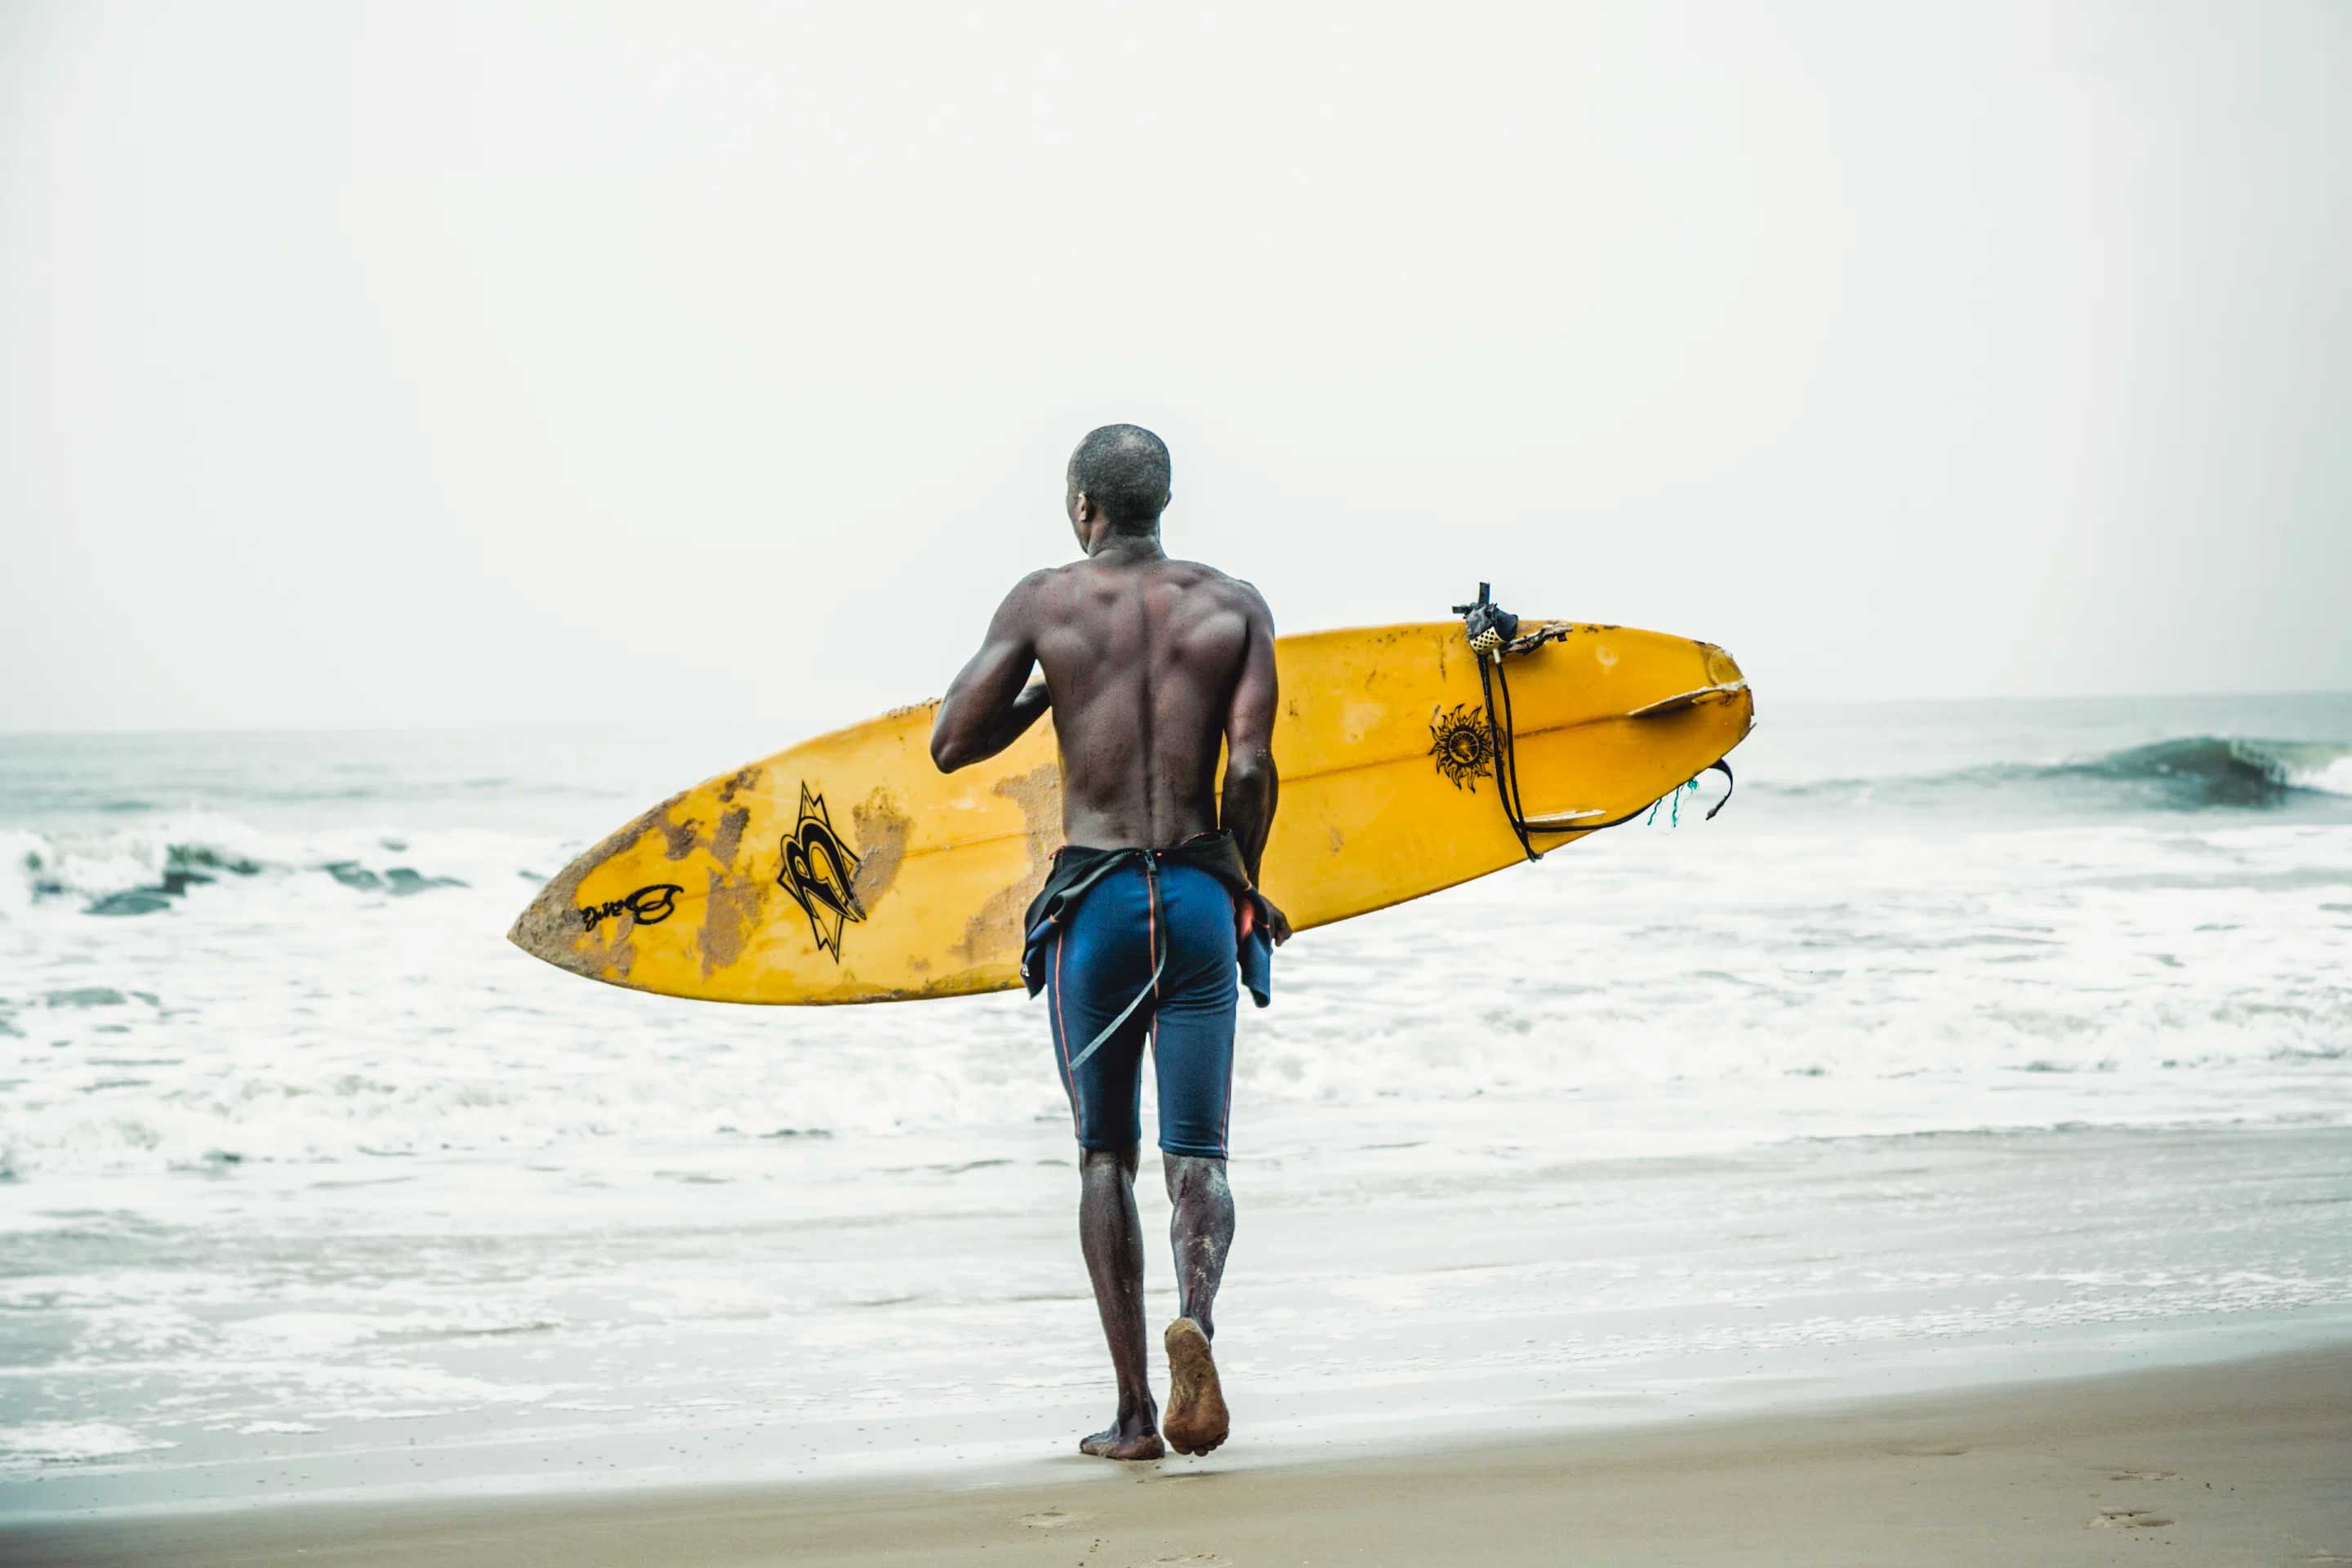 AFROSURF: The Book